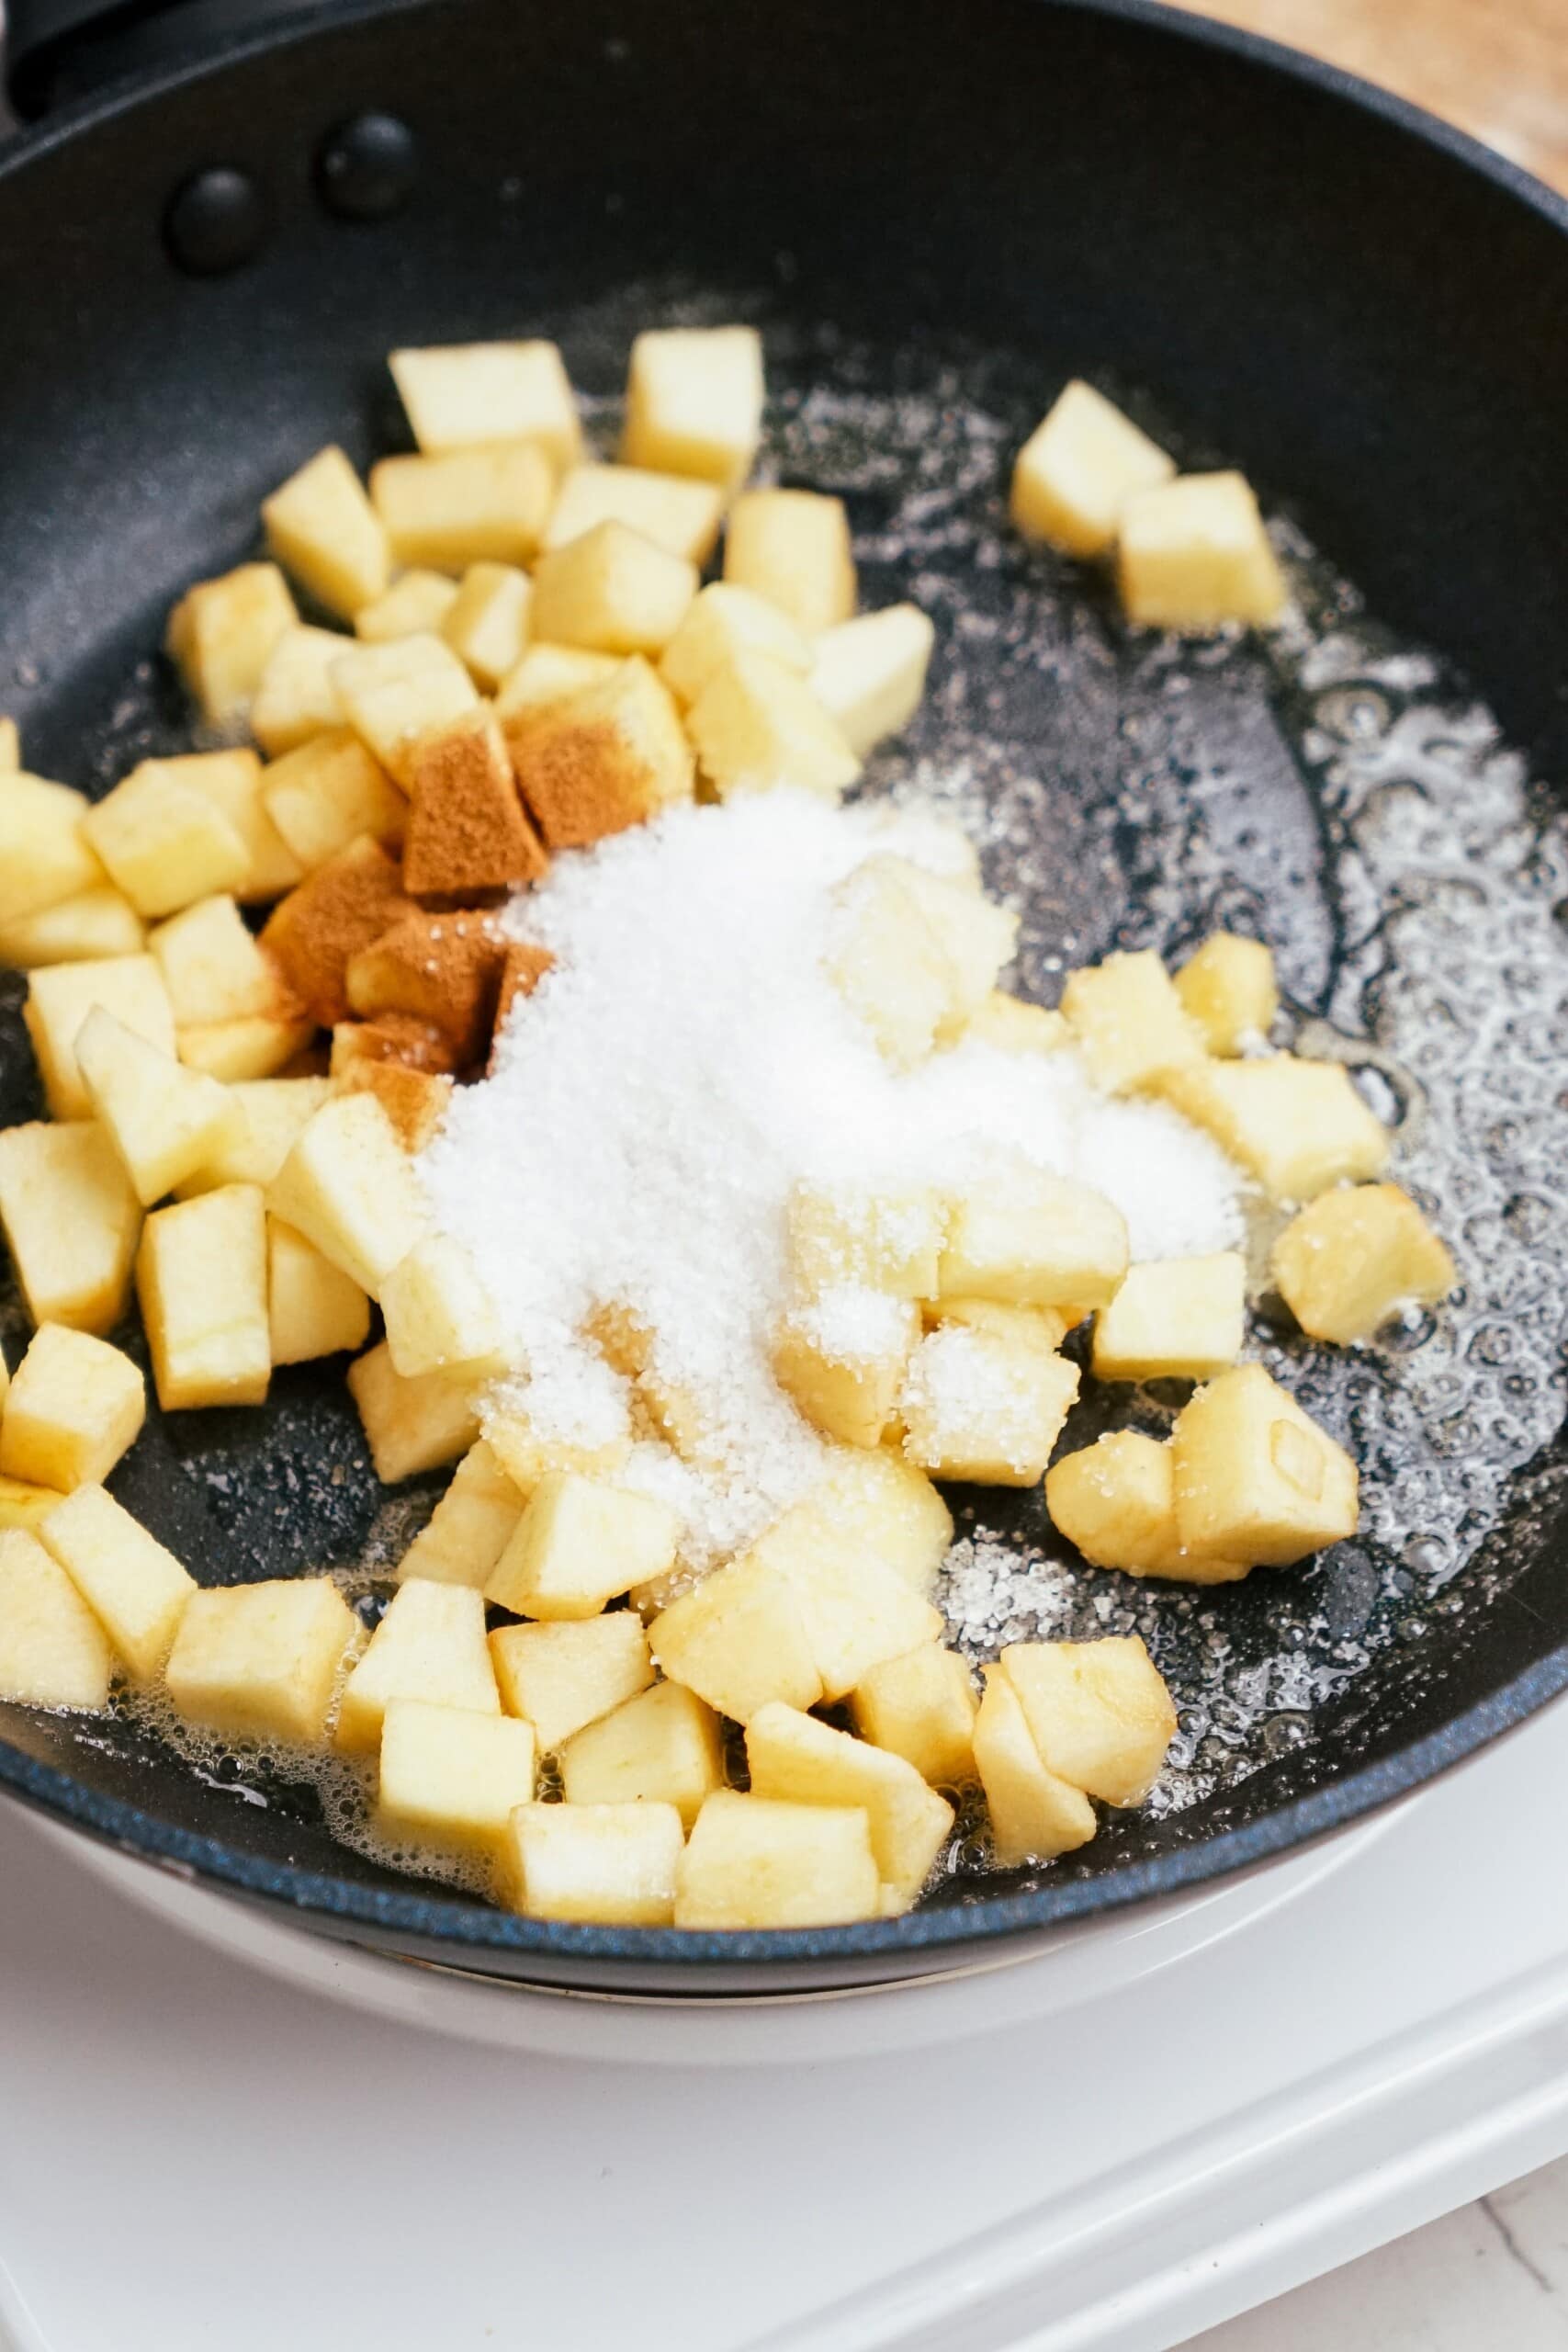 diced apples, cinnamon and sugar in a skillet